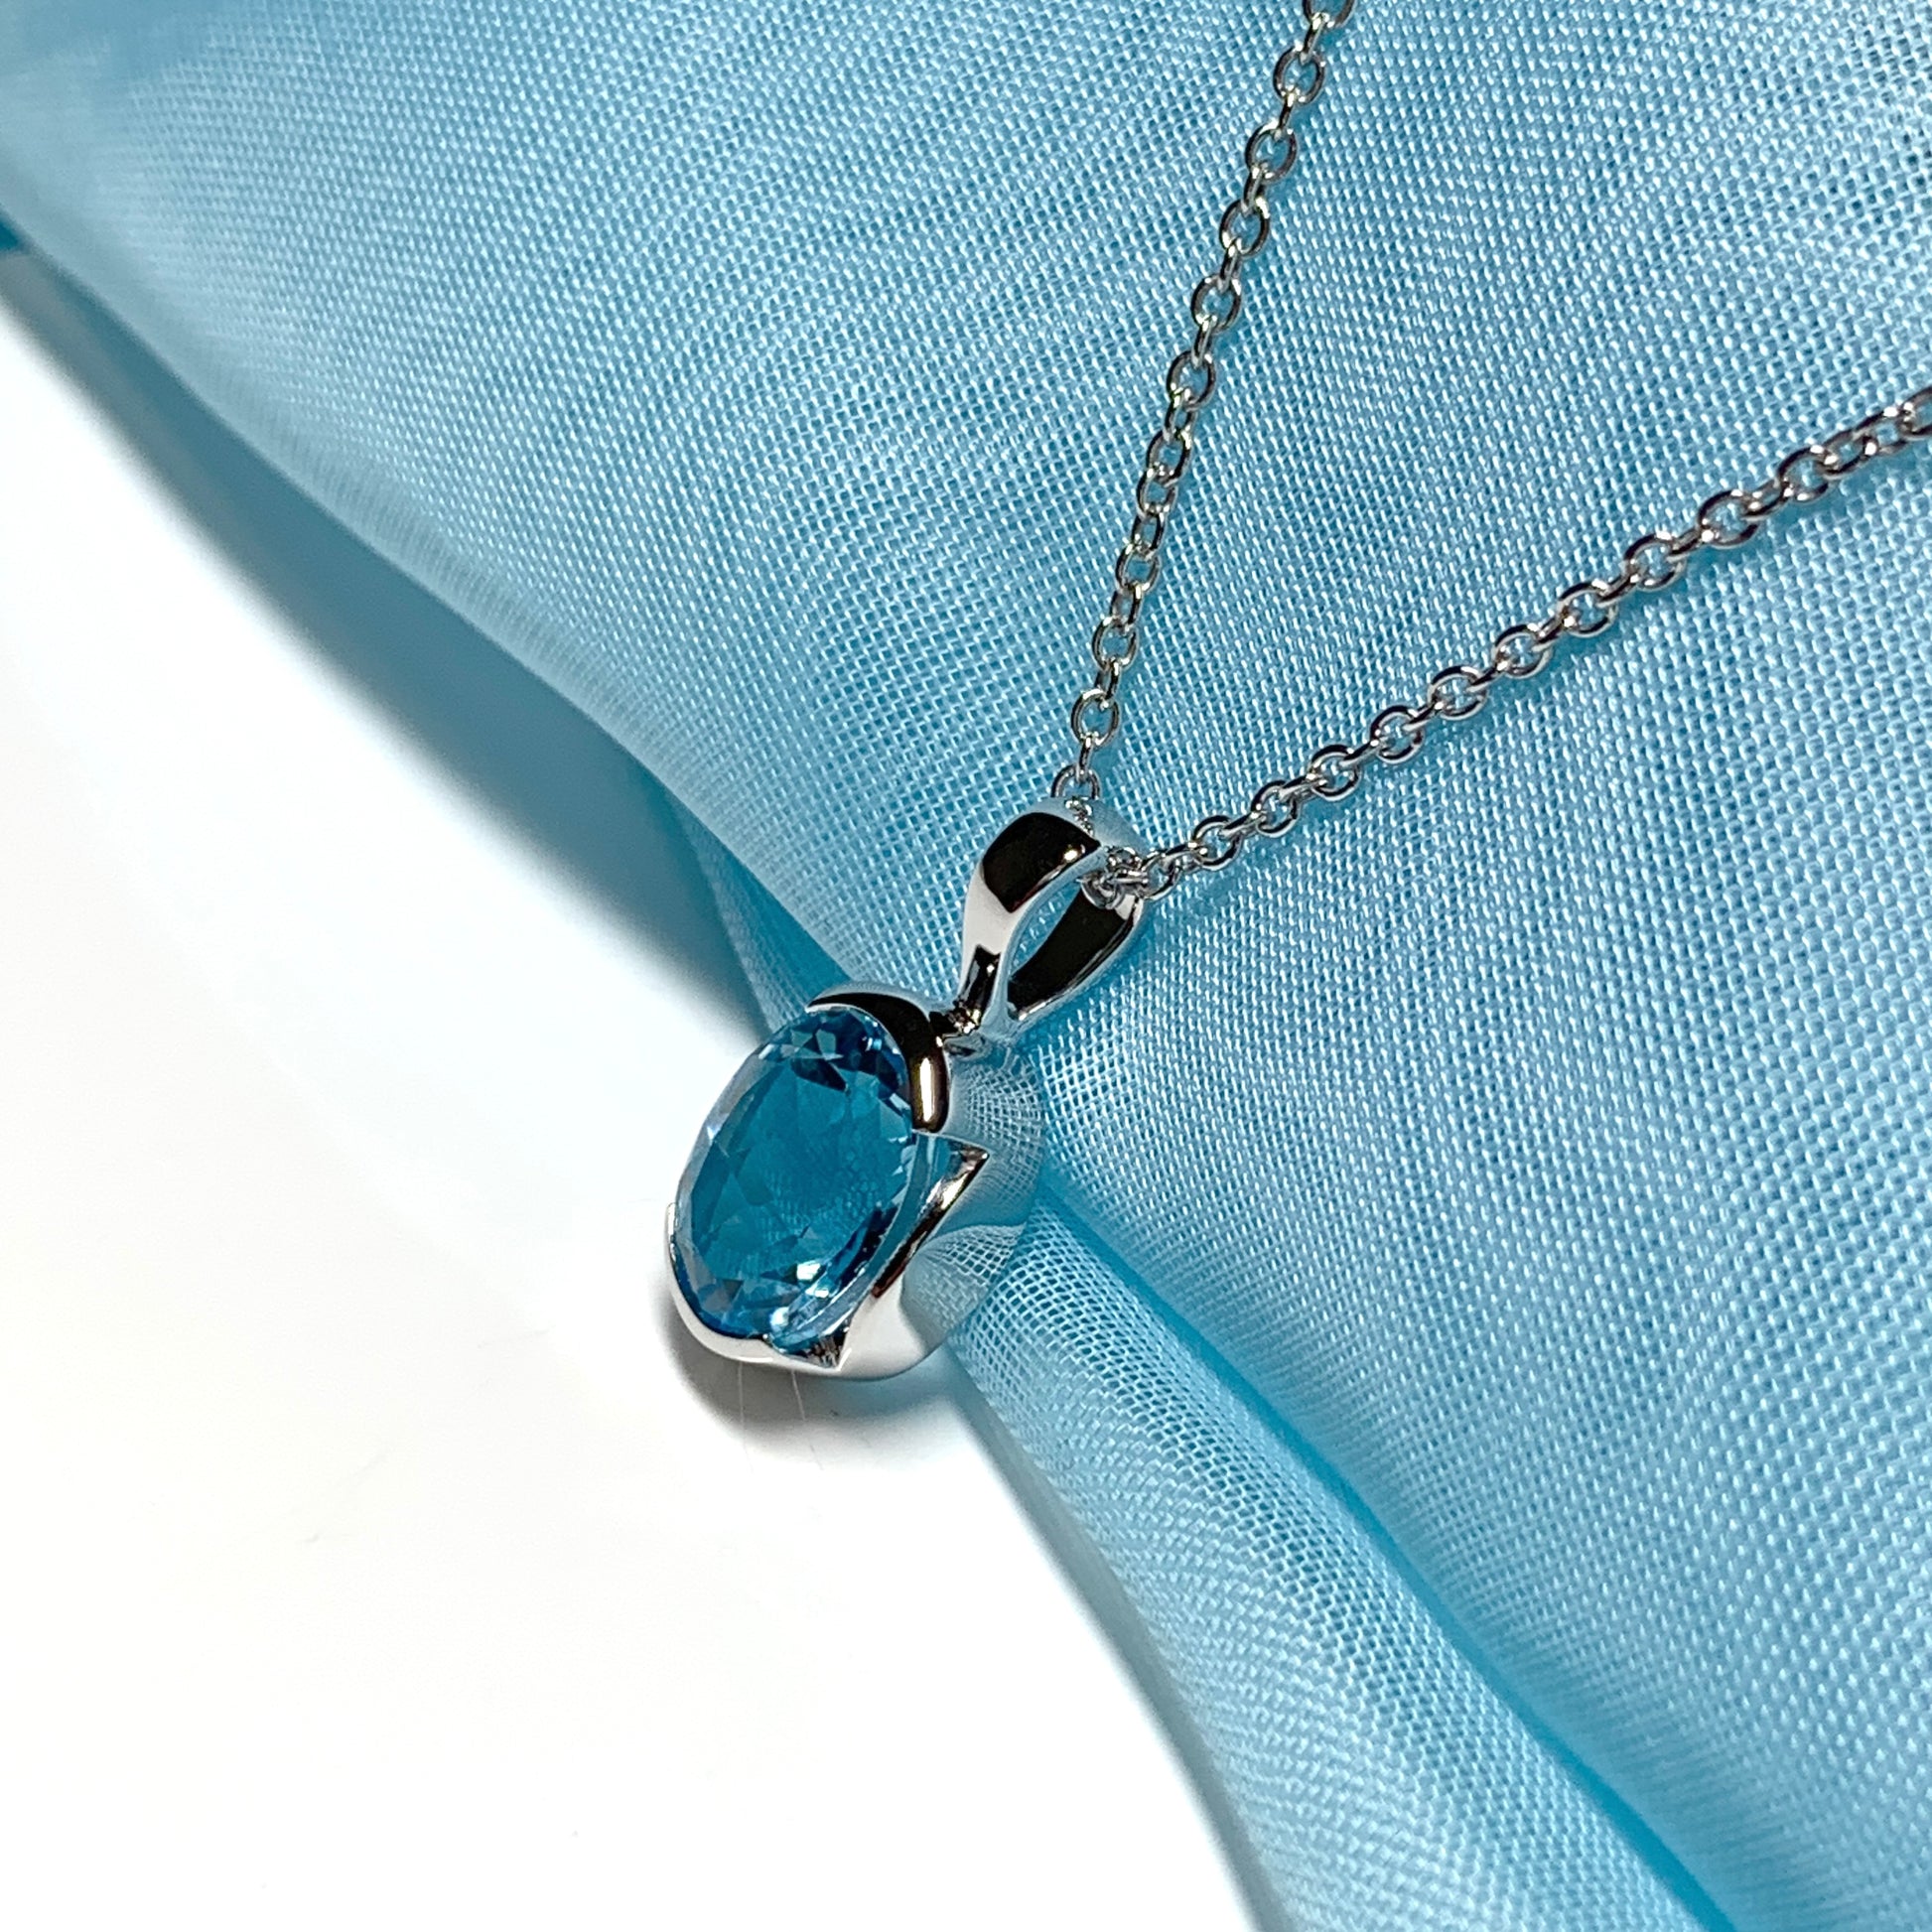 Real blue topaz necklace pendant oval smooth rubbed over setting